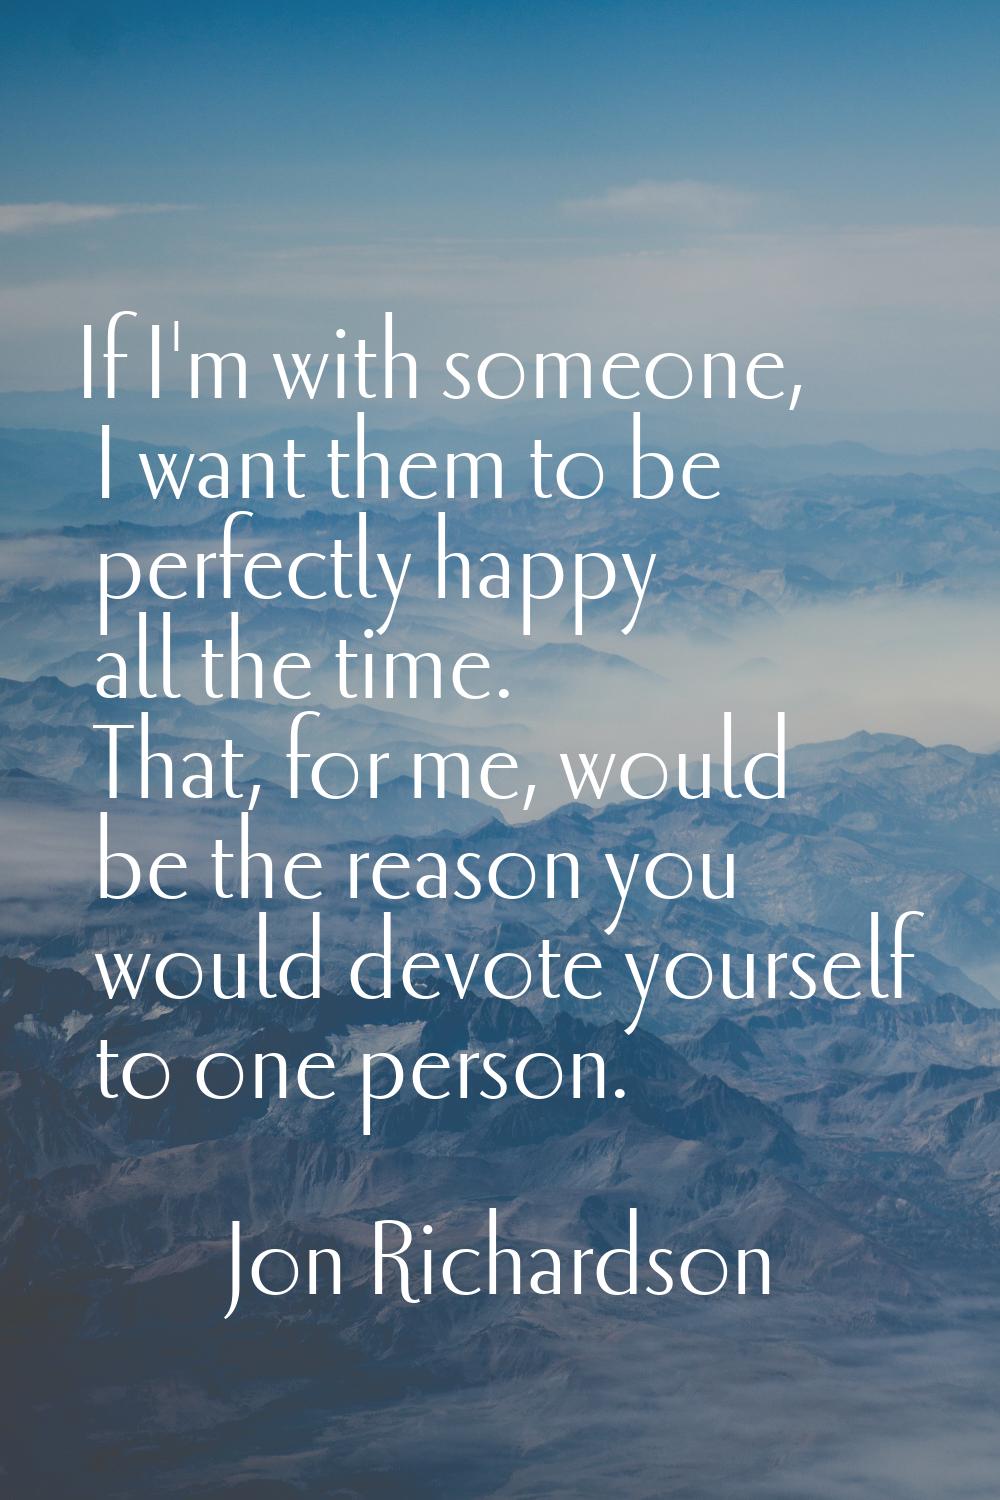 If I'm with someone, I want them to be perfectly happy all the time. That, for me, would be the rea